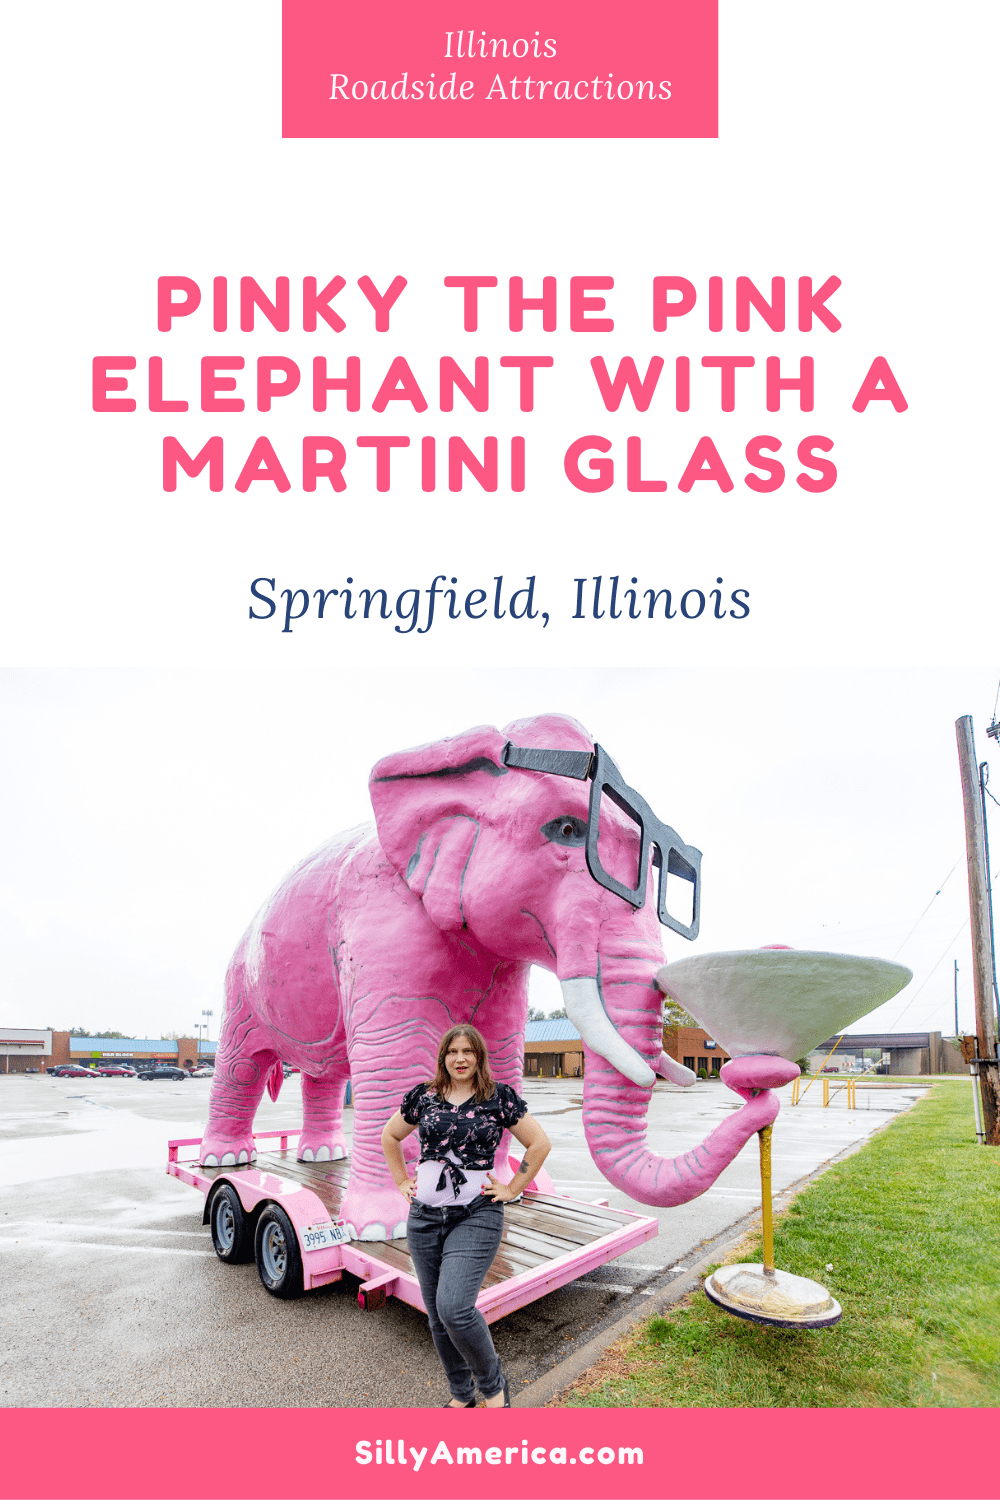 If you're seeing pink elephants on a road trip, you should probably pull your car over.  Particularly if you see this pink elephant ahead: Pinky, the Pink Elephant with a Martini Glass and Glasses in Springfield, Illinois. Because you don't want to miss this fun Illinois roadside attraction!  #RoadTrips #RoadTripStop #Route66 #Route66RoadTrip #IllinoisRoute66 #Illinois #IllinoisRoadTrip #IllinoisRoadsideAttractions #RoadsideAttractions #RoadsideAttraction #RoadsideAmerica #RoadTrip